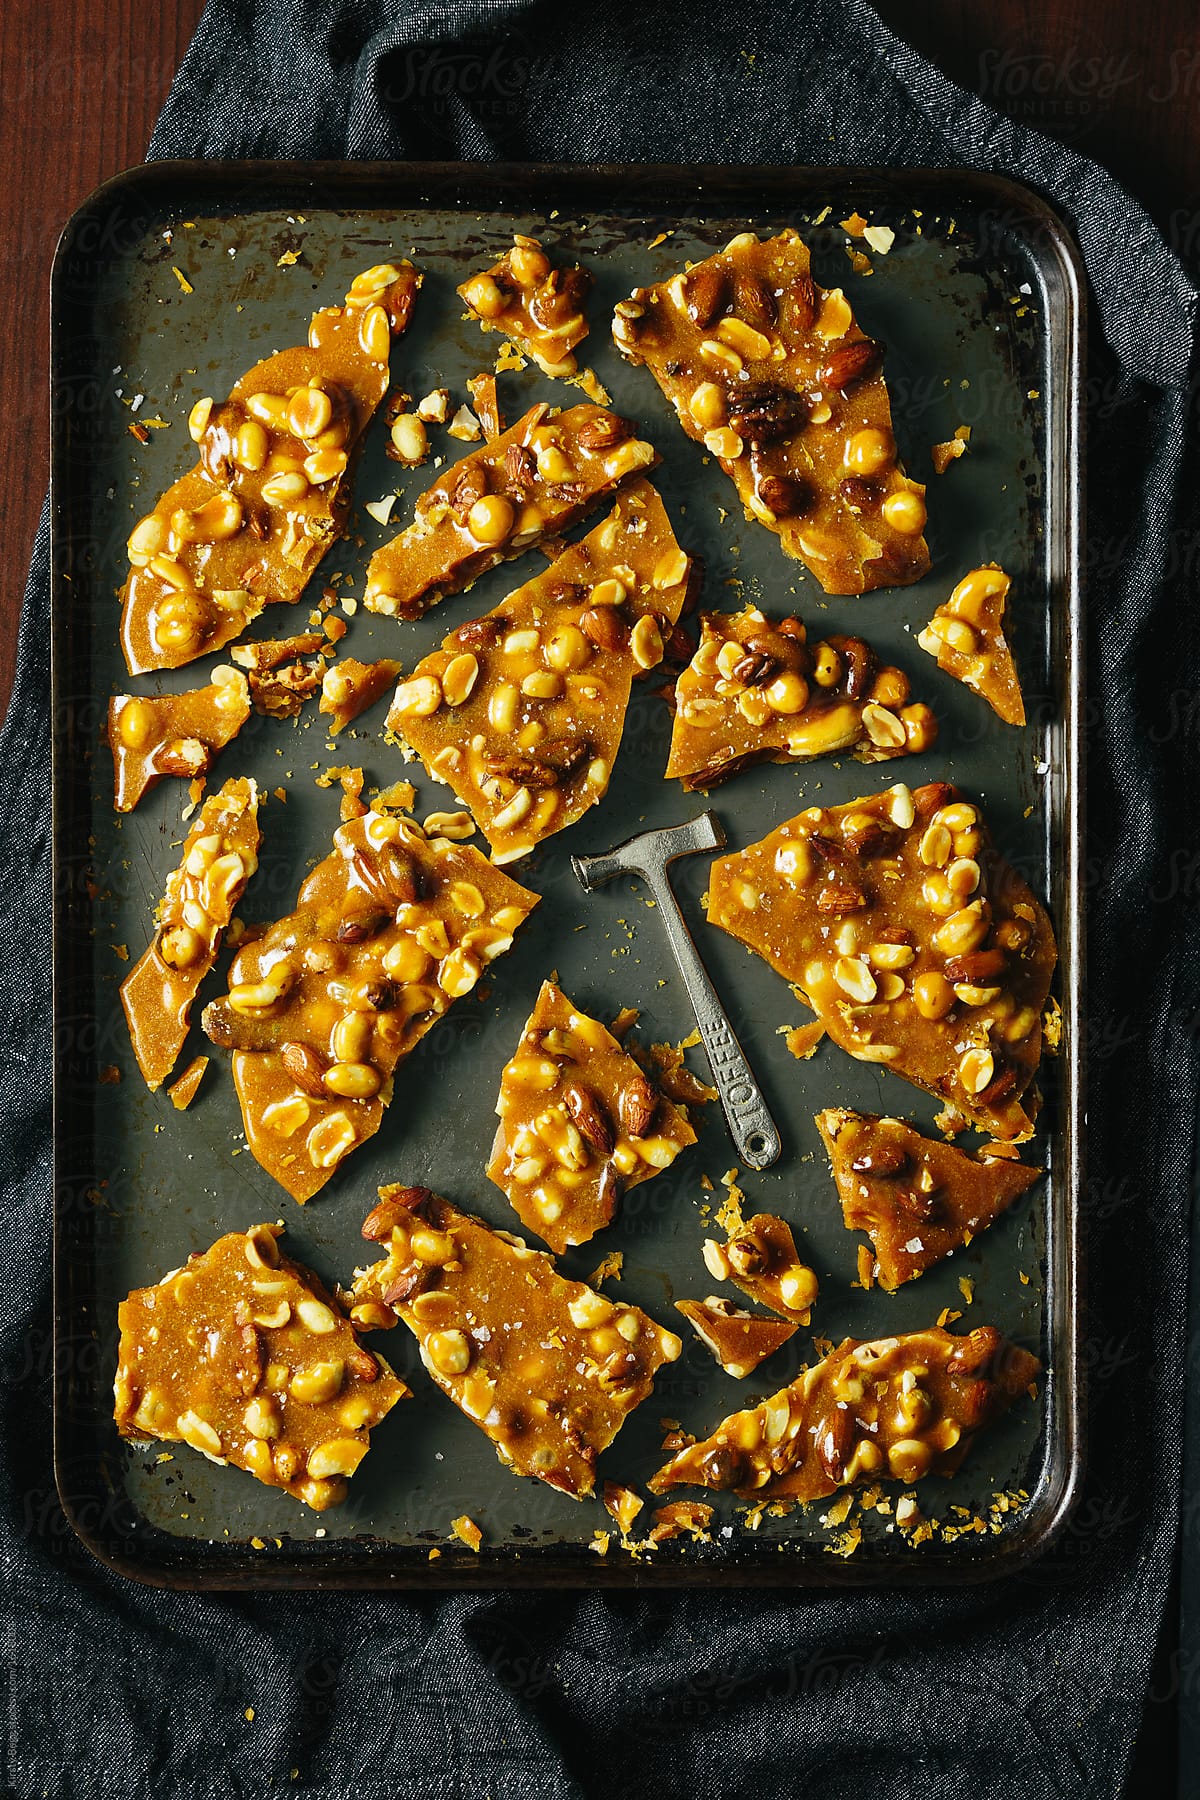 Salted caramel nut brittle with toffee hammer